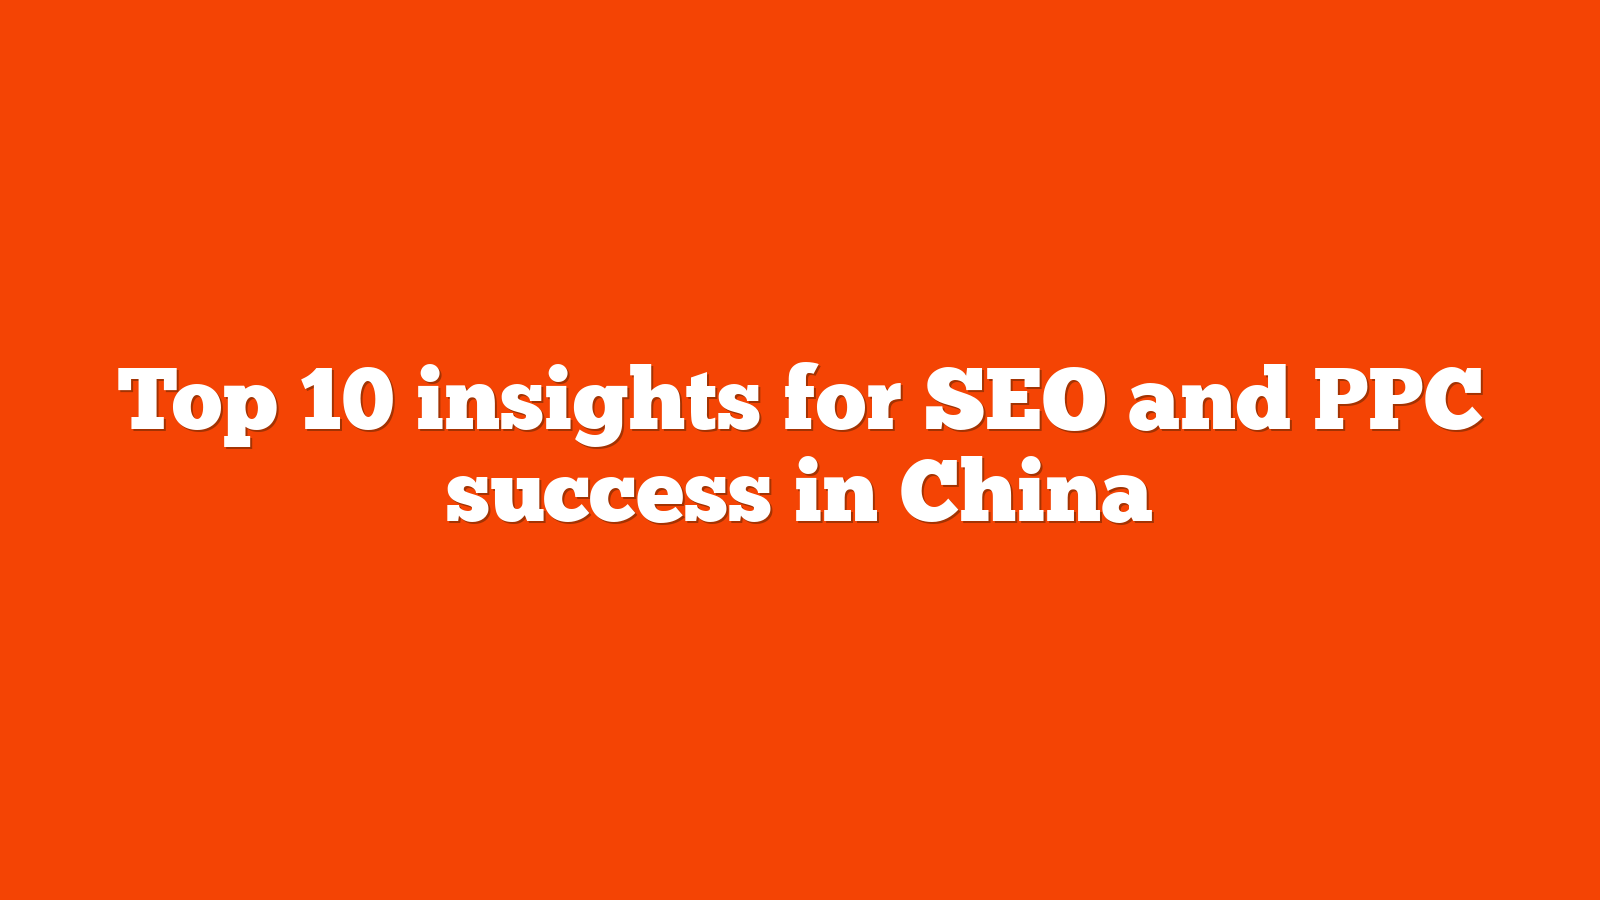 Top 10 insights for SEO and PPC success in China